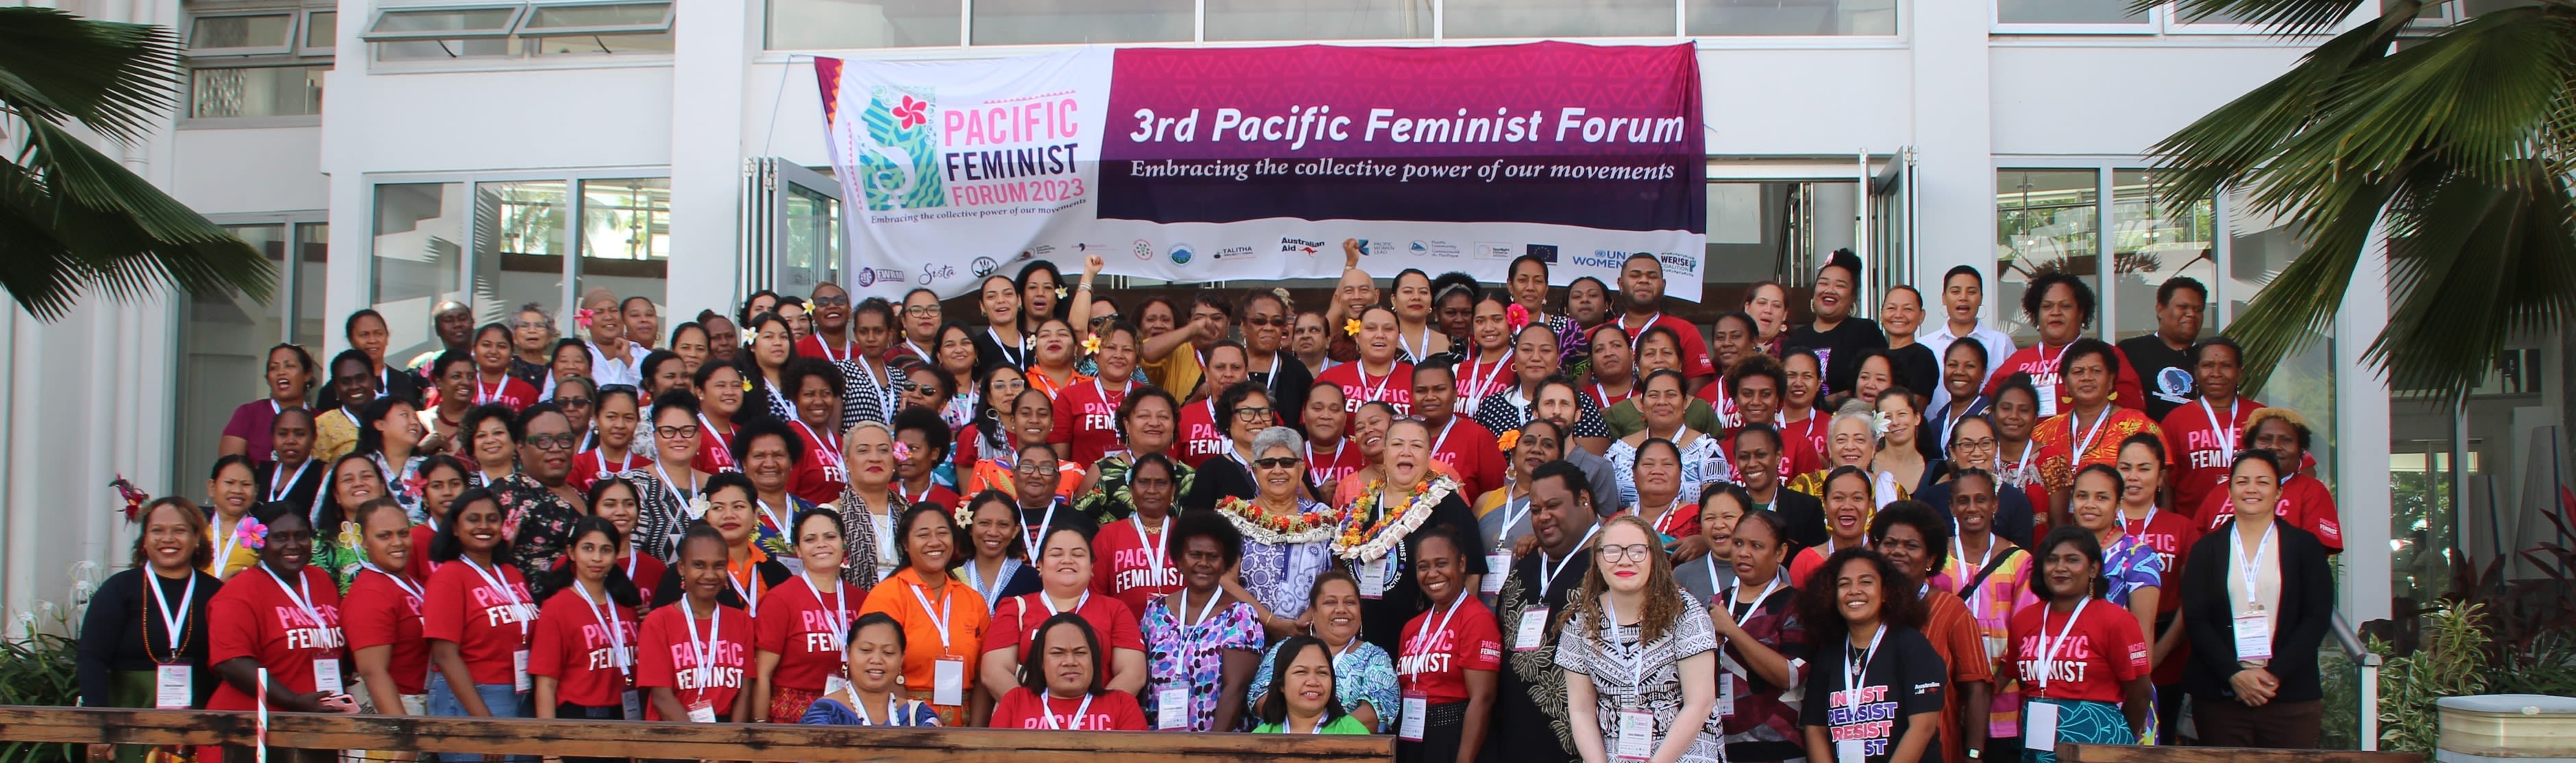 All participants at the 3rd Pacific Feminist Forum are posing together in an outdoor space in front of the event banner. Many are wearing red t-shirts that read 'Pacific Feminist'